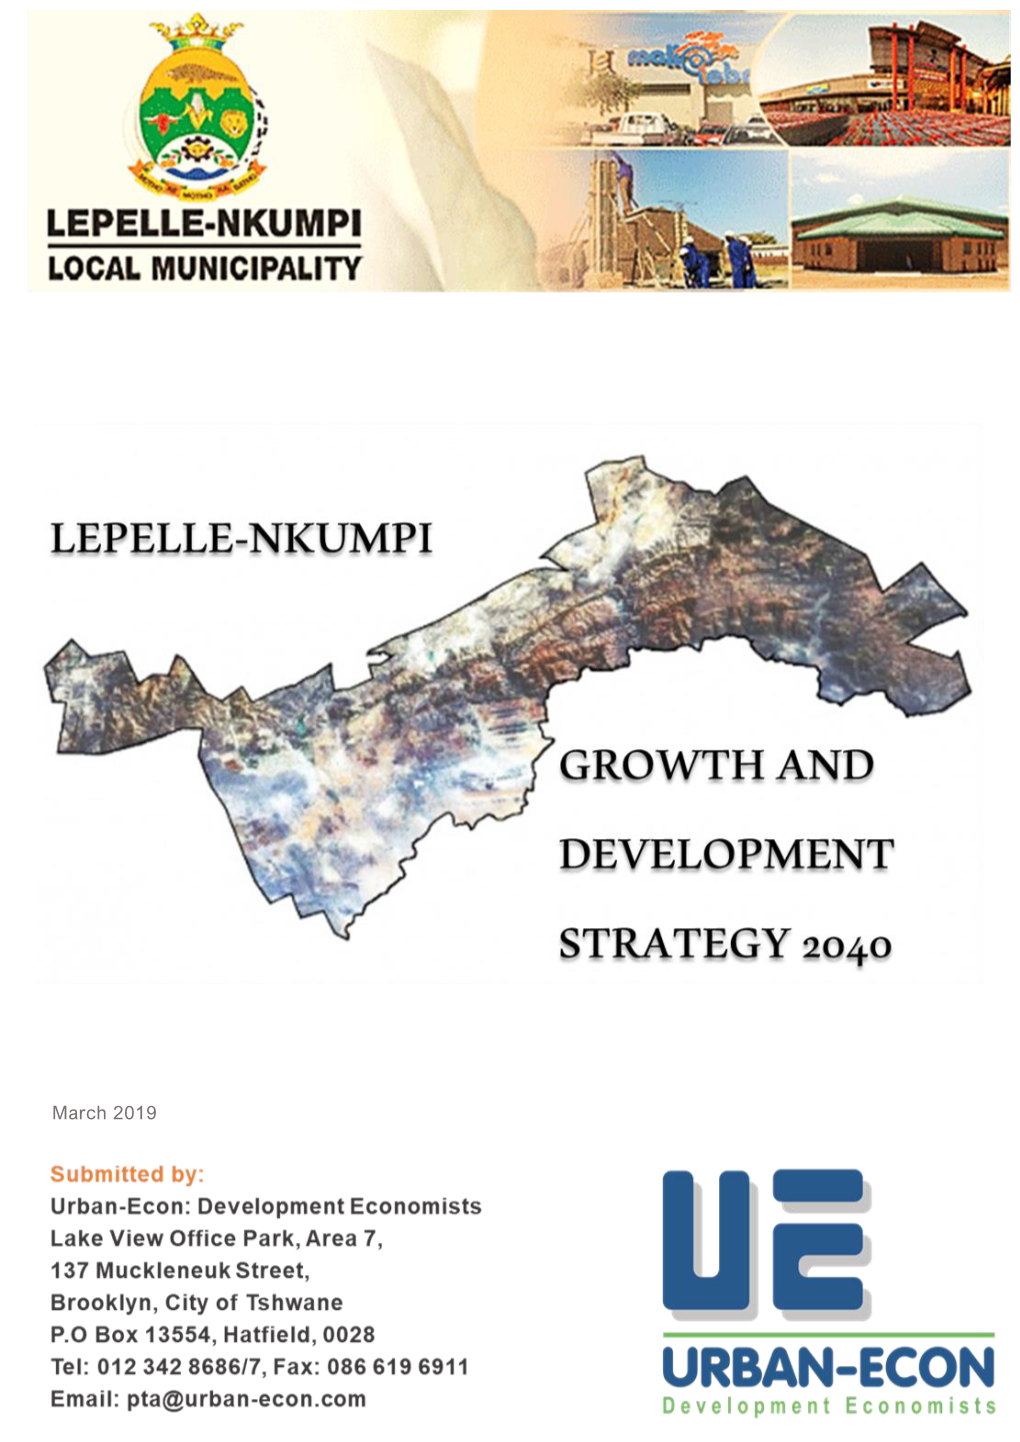 Lepelle-Nkumpi Local Municipality Growth and Development Strategy